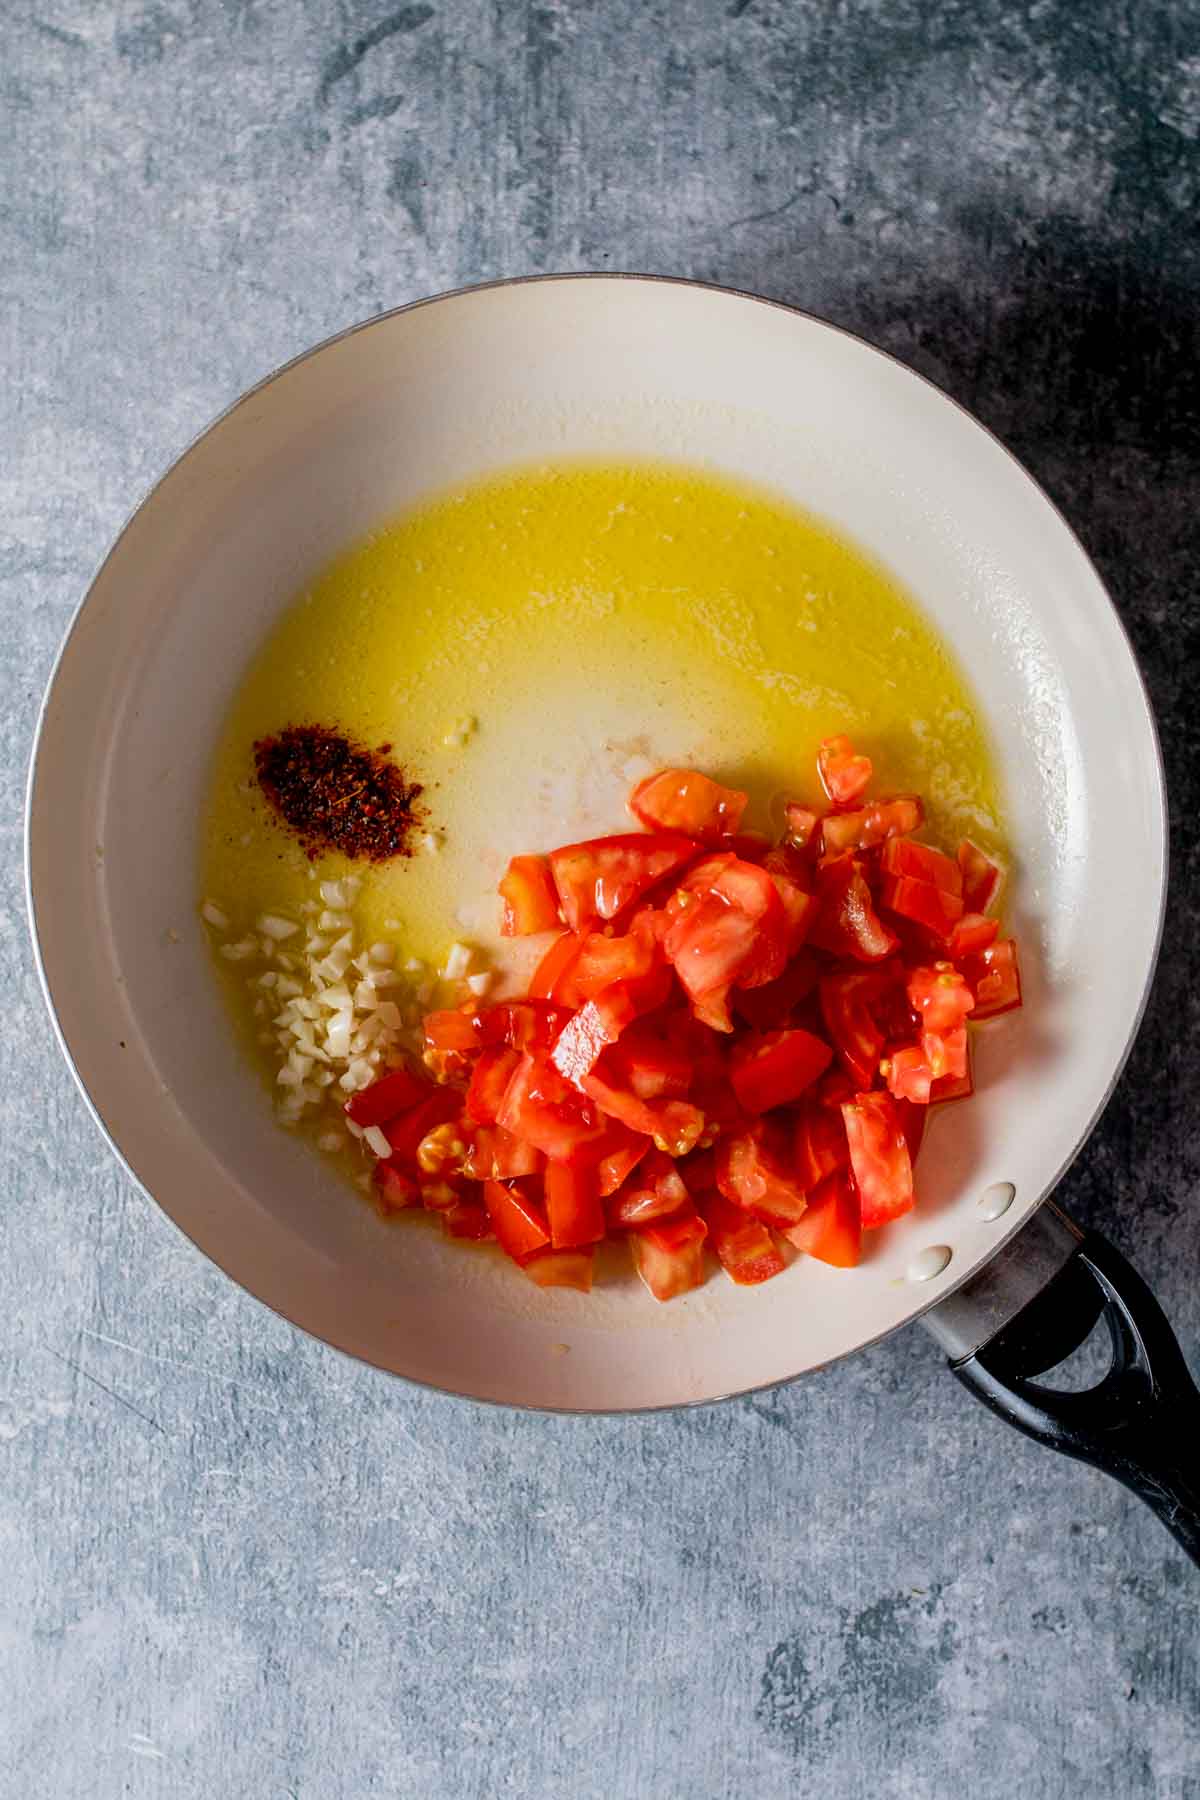 oil, garlic and tomatoes in a saute pan